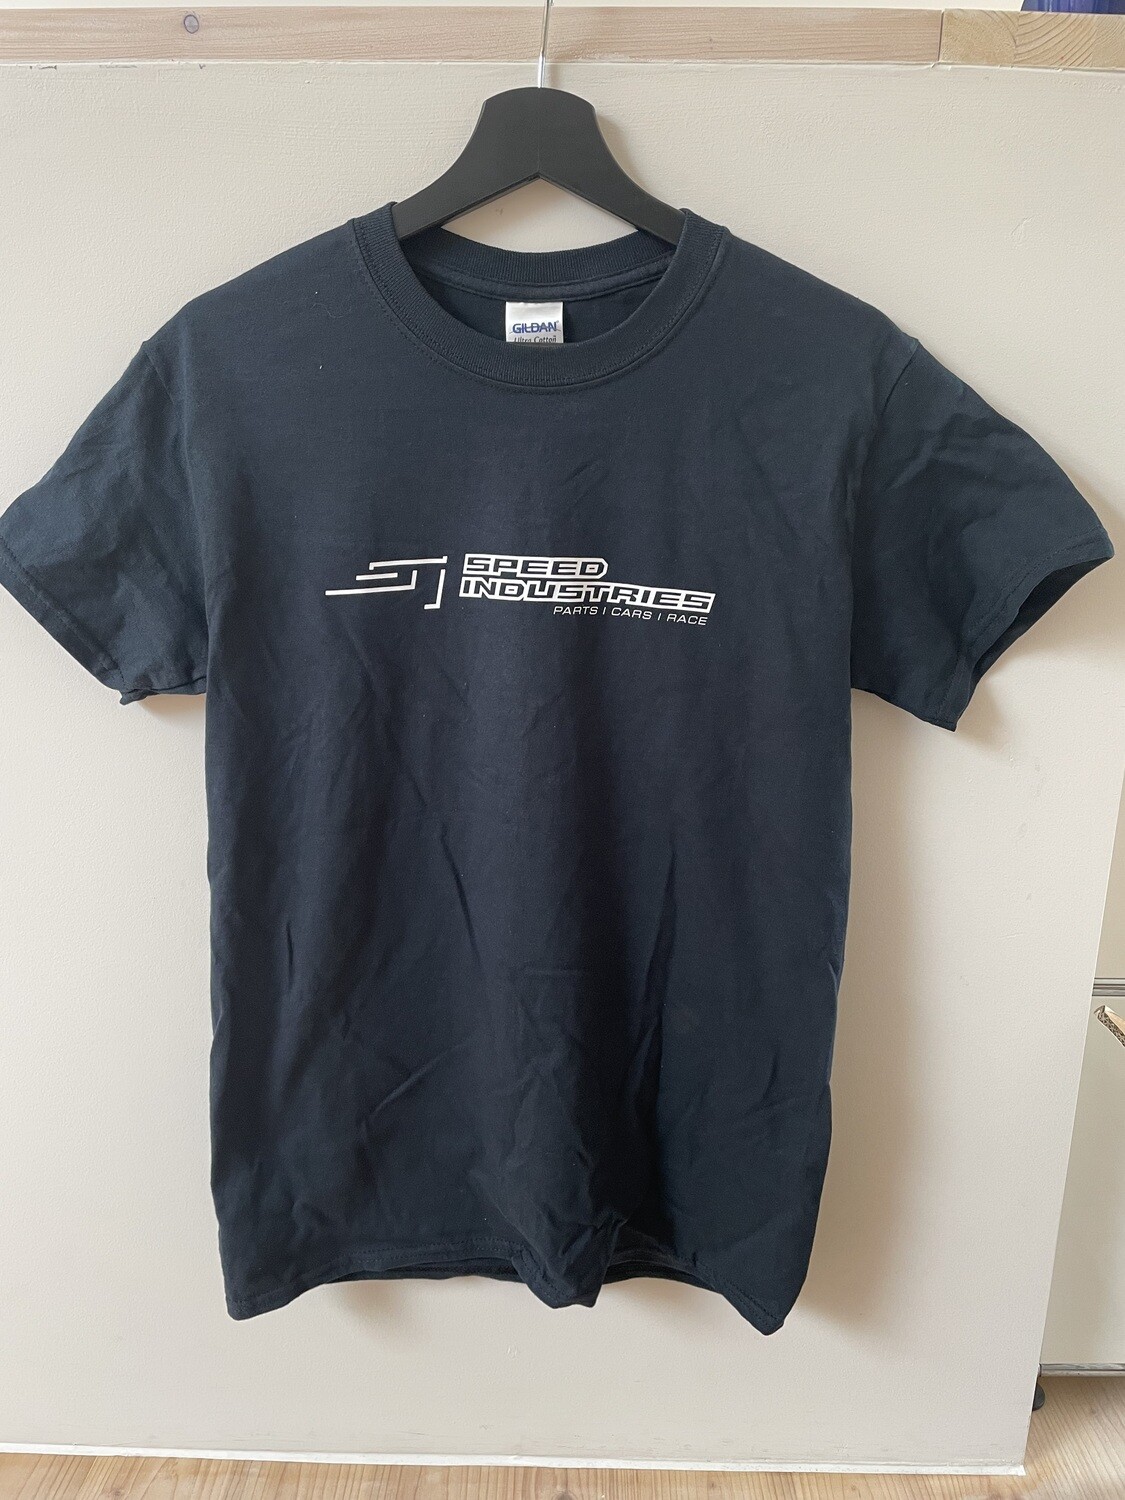 Classic Speed Industries T-Shirt, Size: S